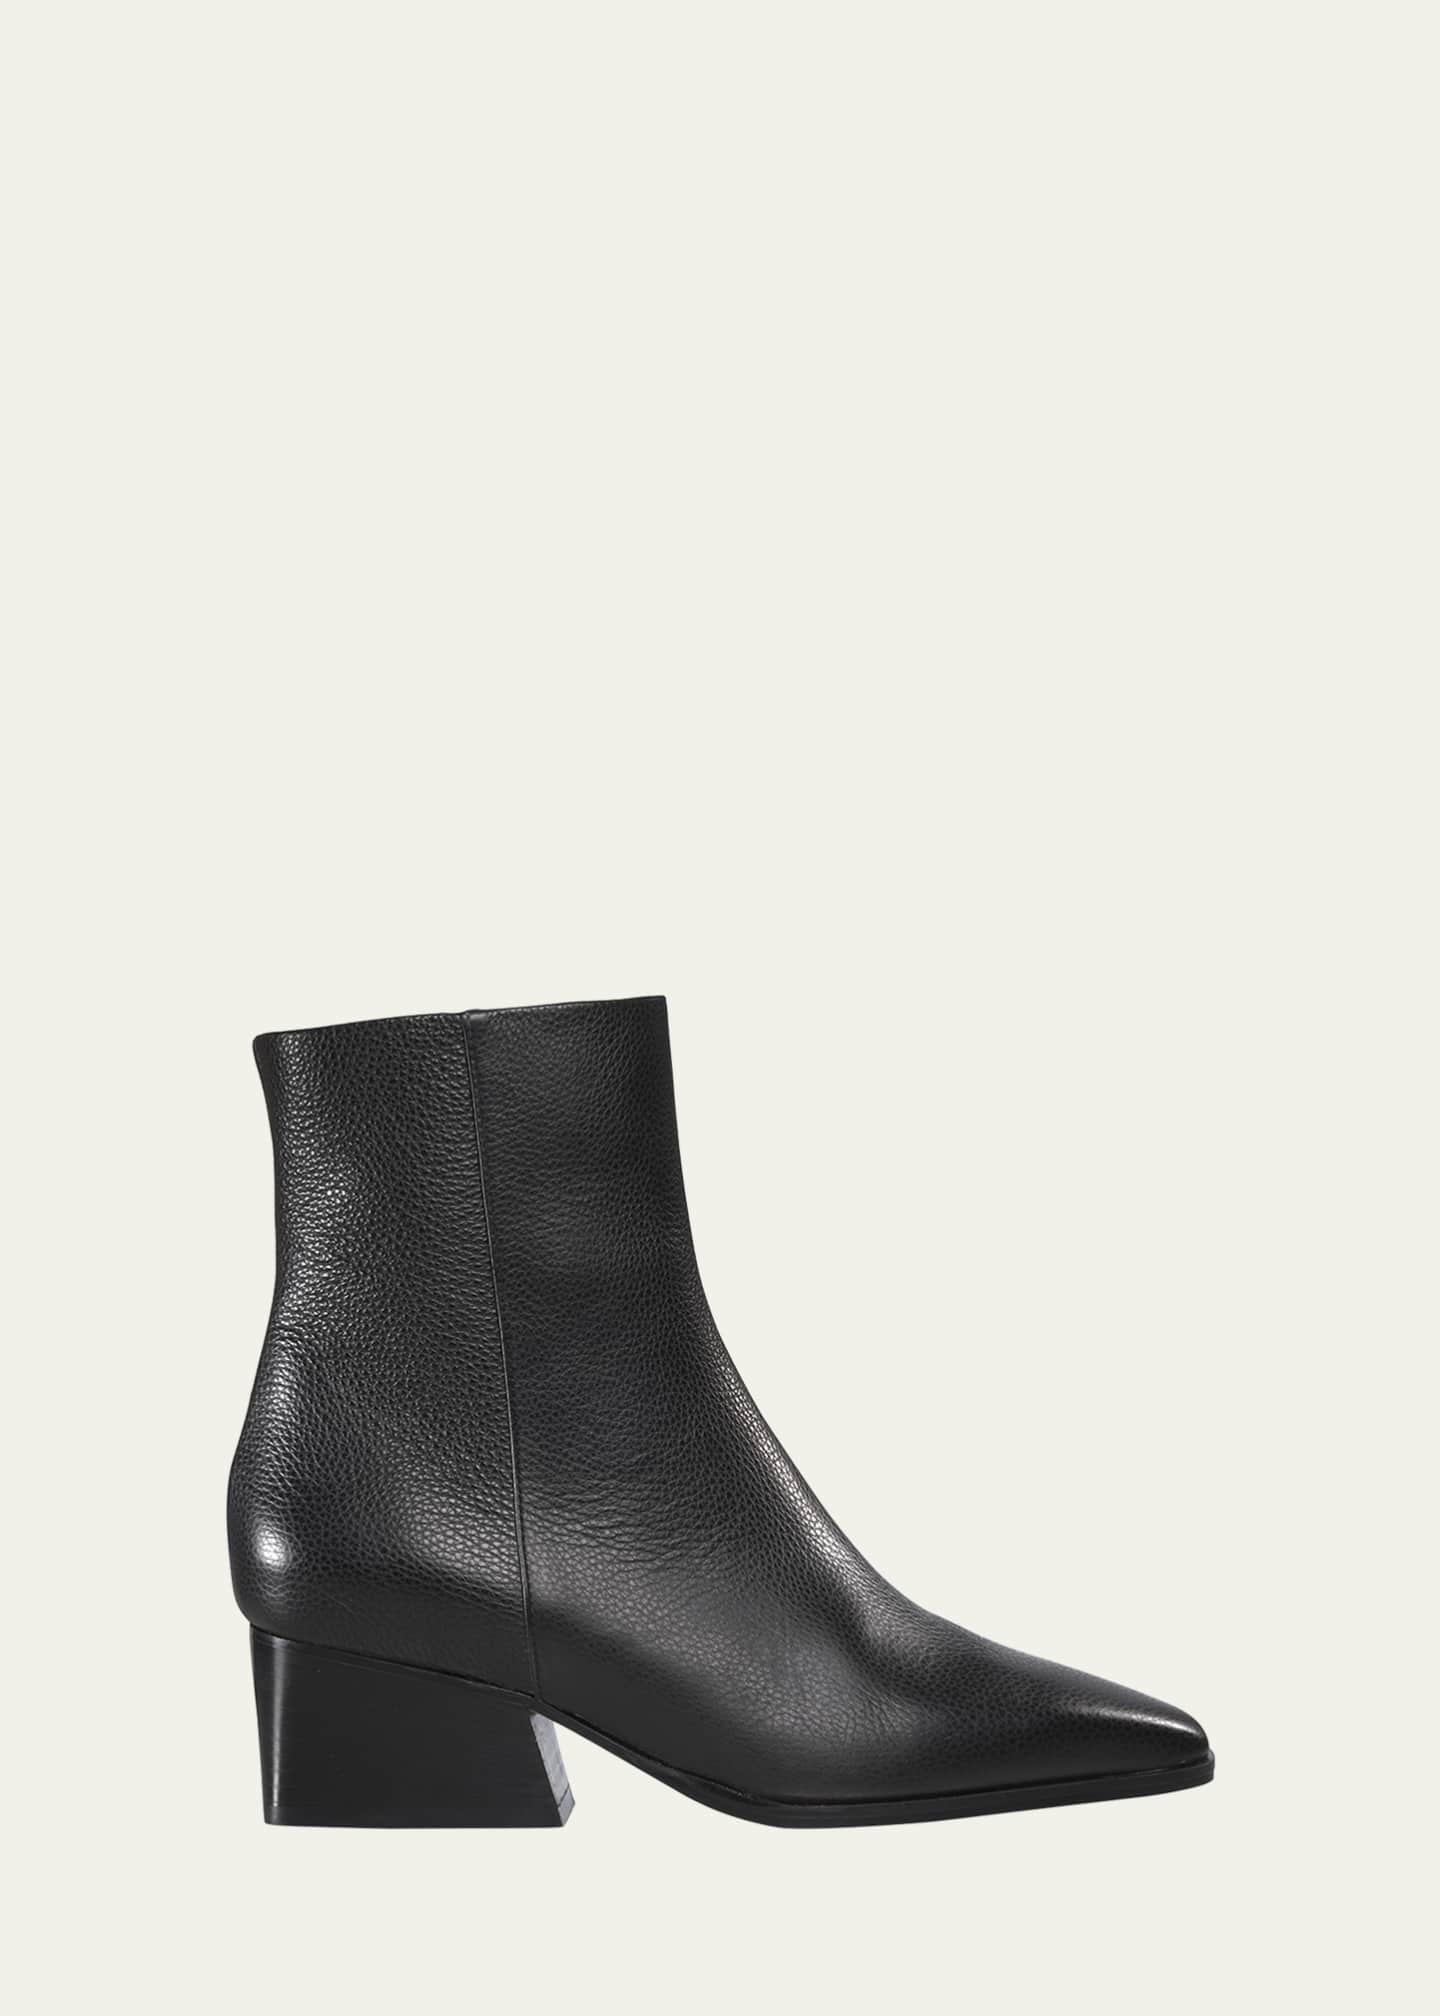 Marion Parke Pauline Leather Zip Ankle Booties